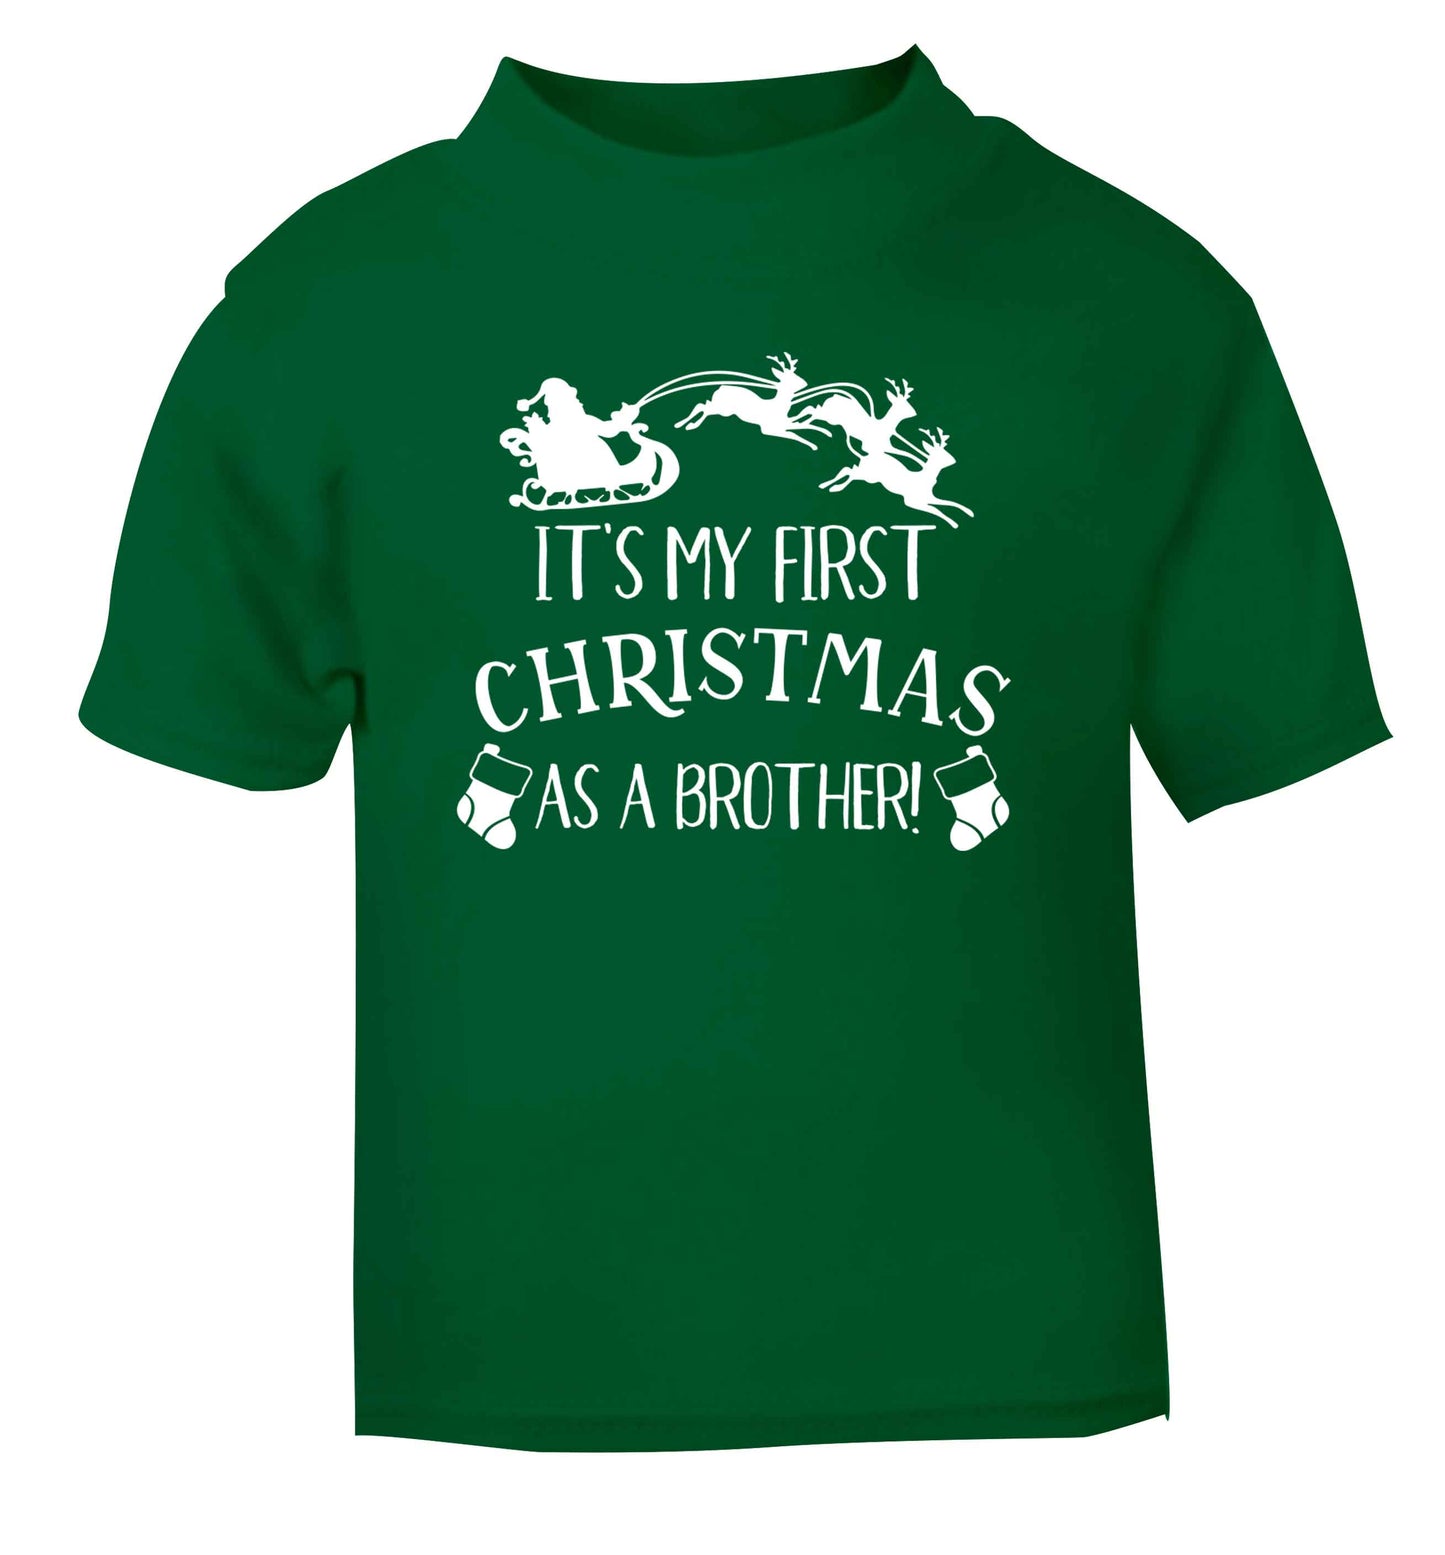 It's my first Christmas as a brother! green Baby Toddler Tshirt 2 Years